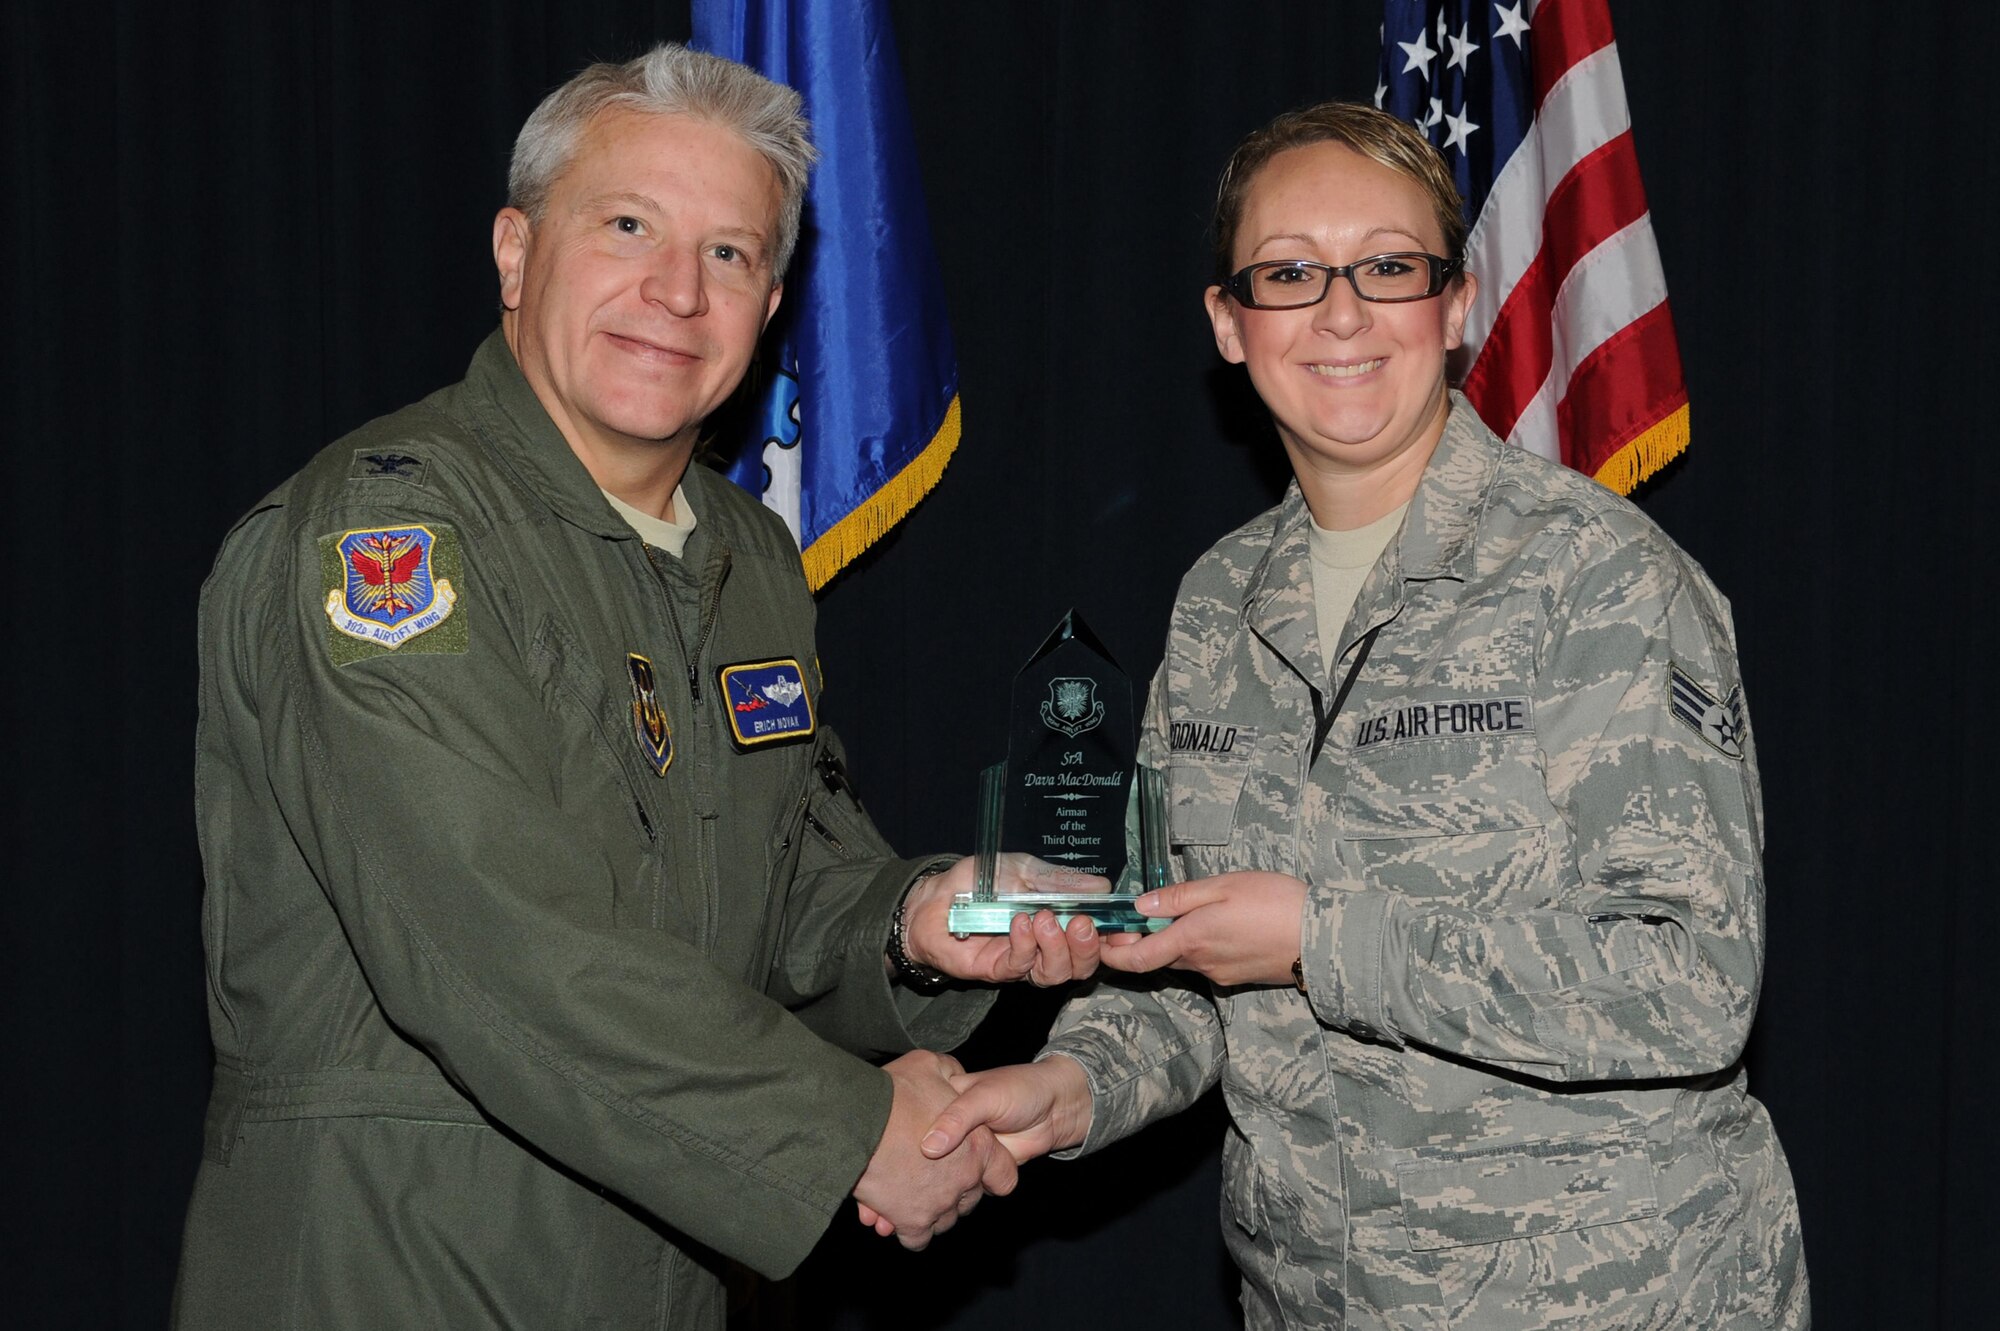 PETERSON AIR FORCE BASE, Colo. – Senior Airman Dava MacDonald (right), an Emergency Action Controller and 302nd Airlift Wing Reservist assigned to with the Colorado Springs Regional Command Post, was presented the 302nd AW Airman of the Third Quarter award by Col. Erich Novak on Nov. 15, 2015 here. Novak, 302nd Airlift Wing vice commander, and Chief Master Sgt. Otis Jones, 302nd Airlift Wing command chief recognized the 2015 quarterly award winners during the November Unit Training Assembly. (U.S. Air Force photo/Senior Airman Amber Sorsek)